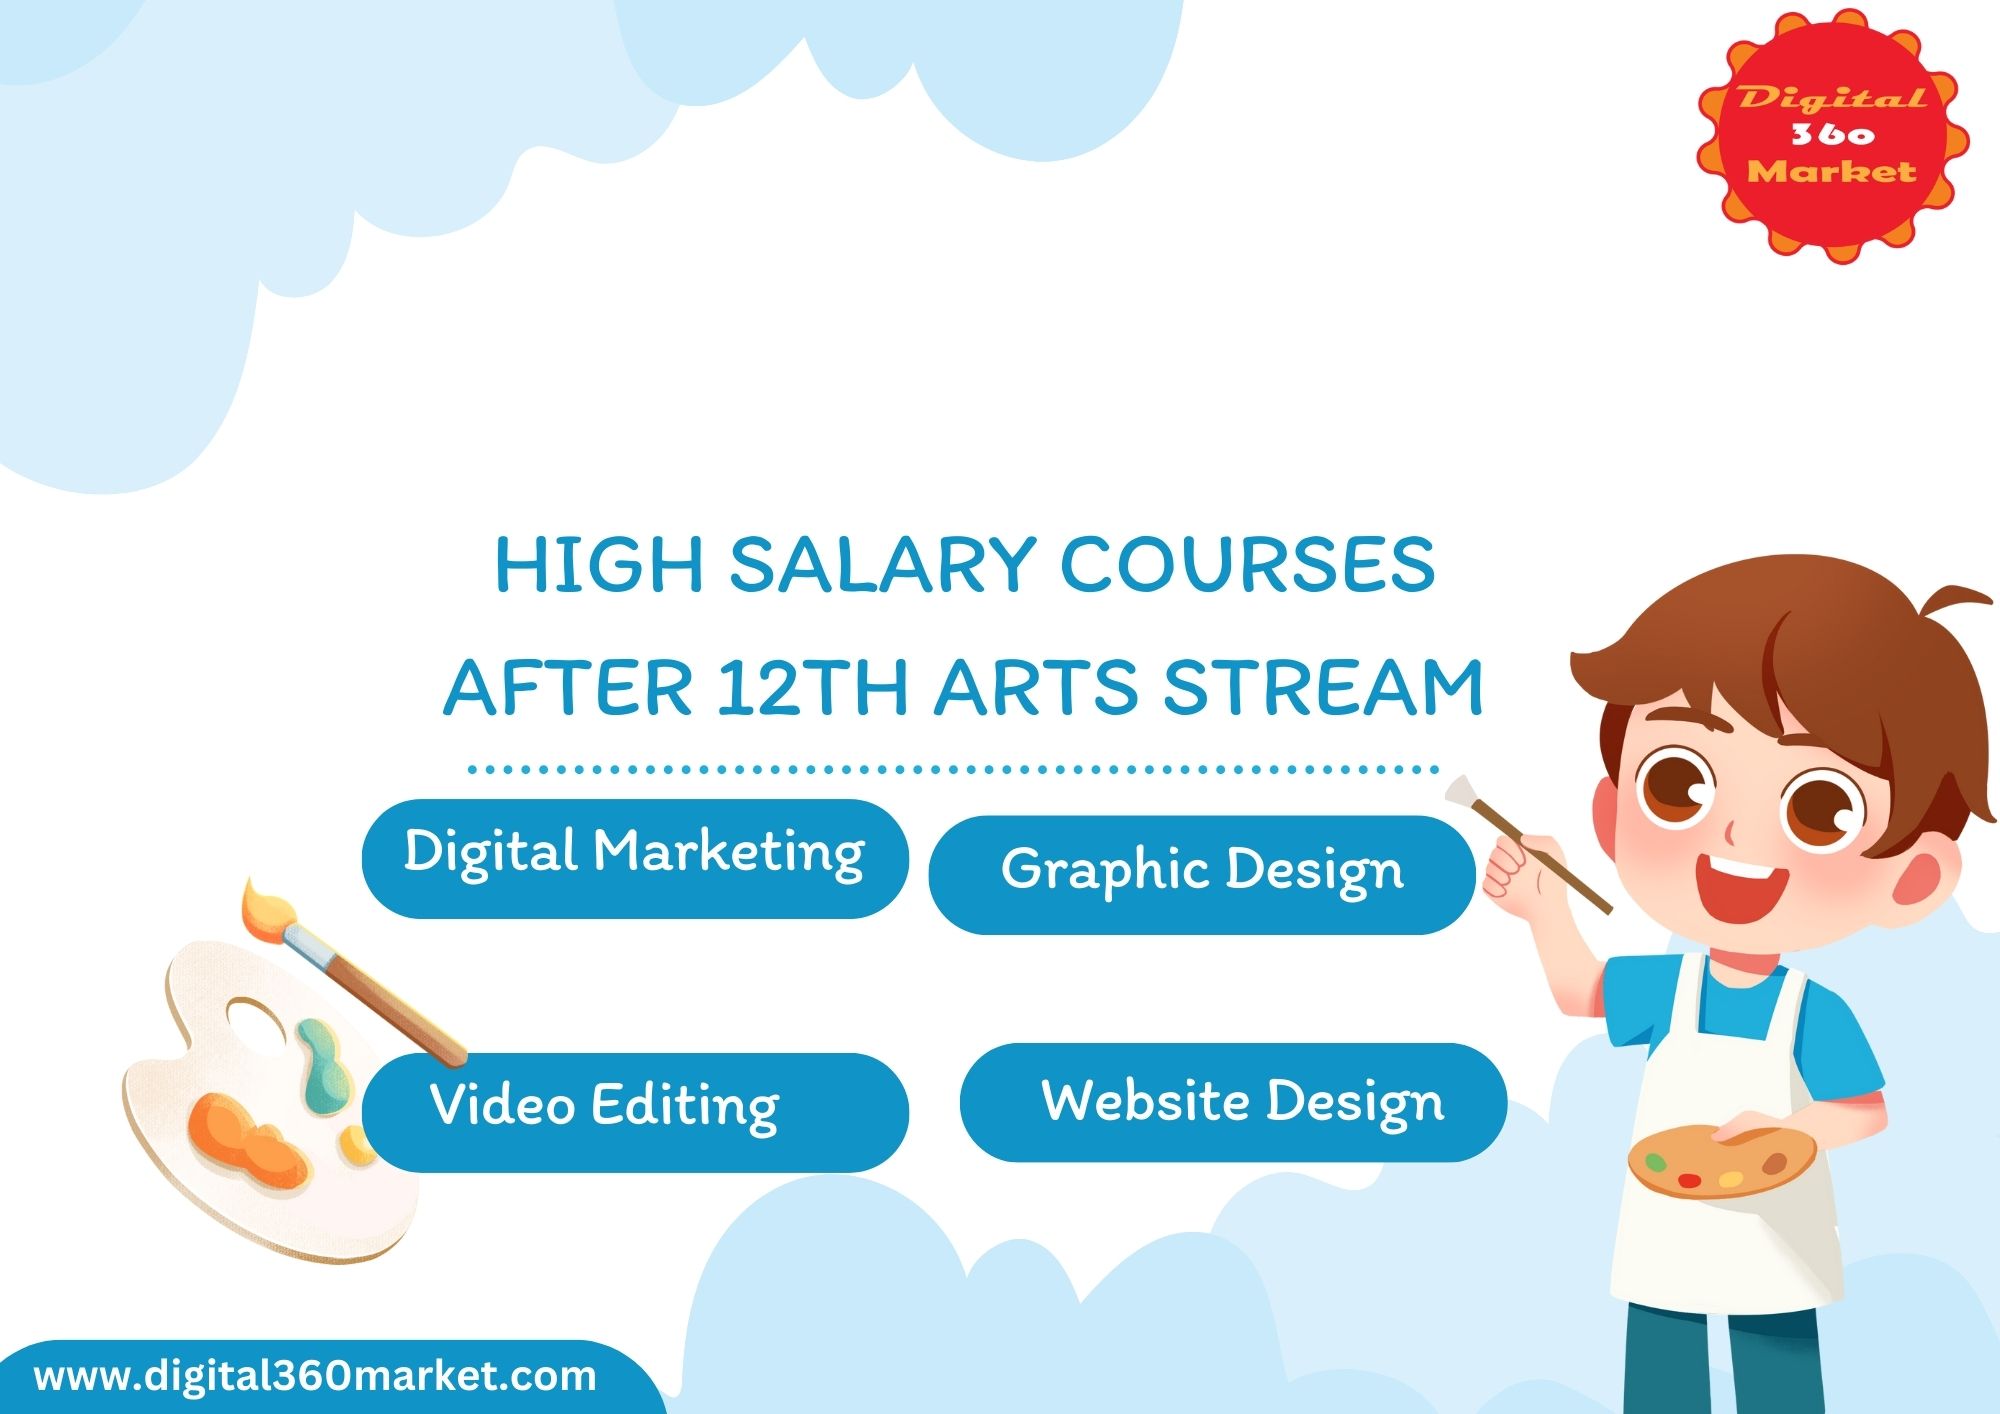 High salary courses after 12th Arts stream